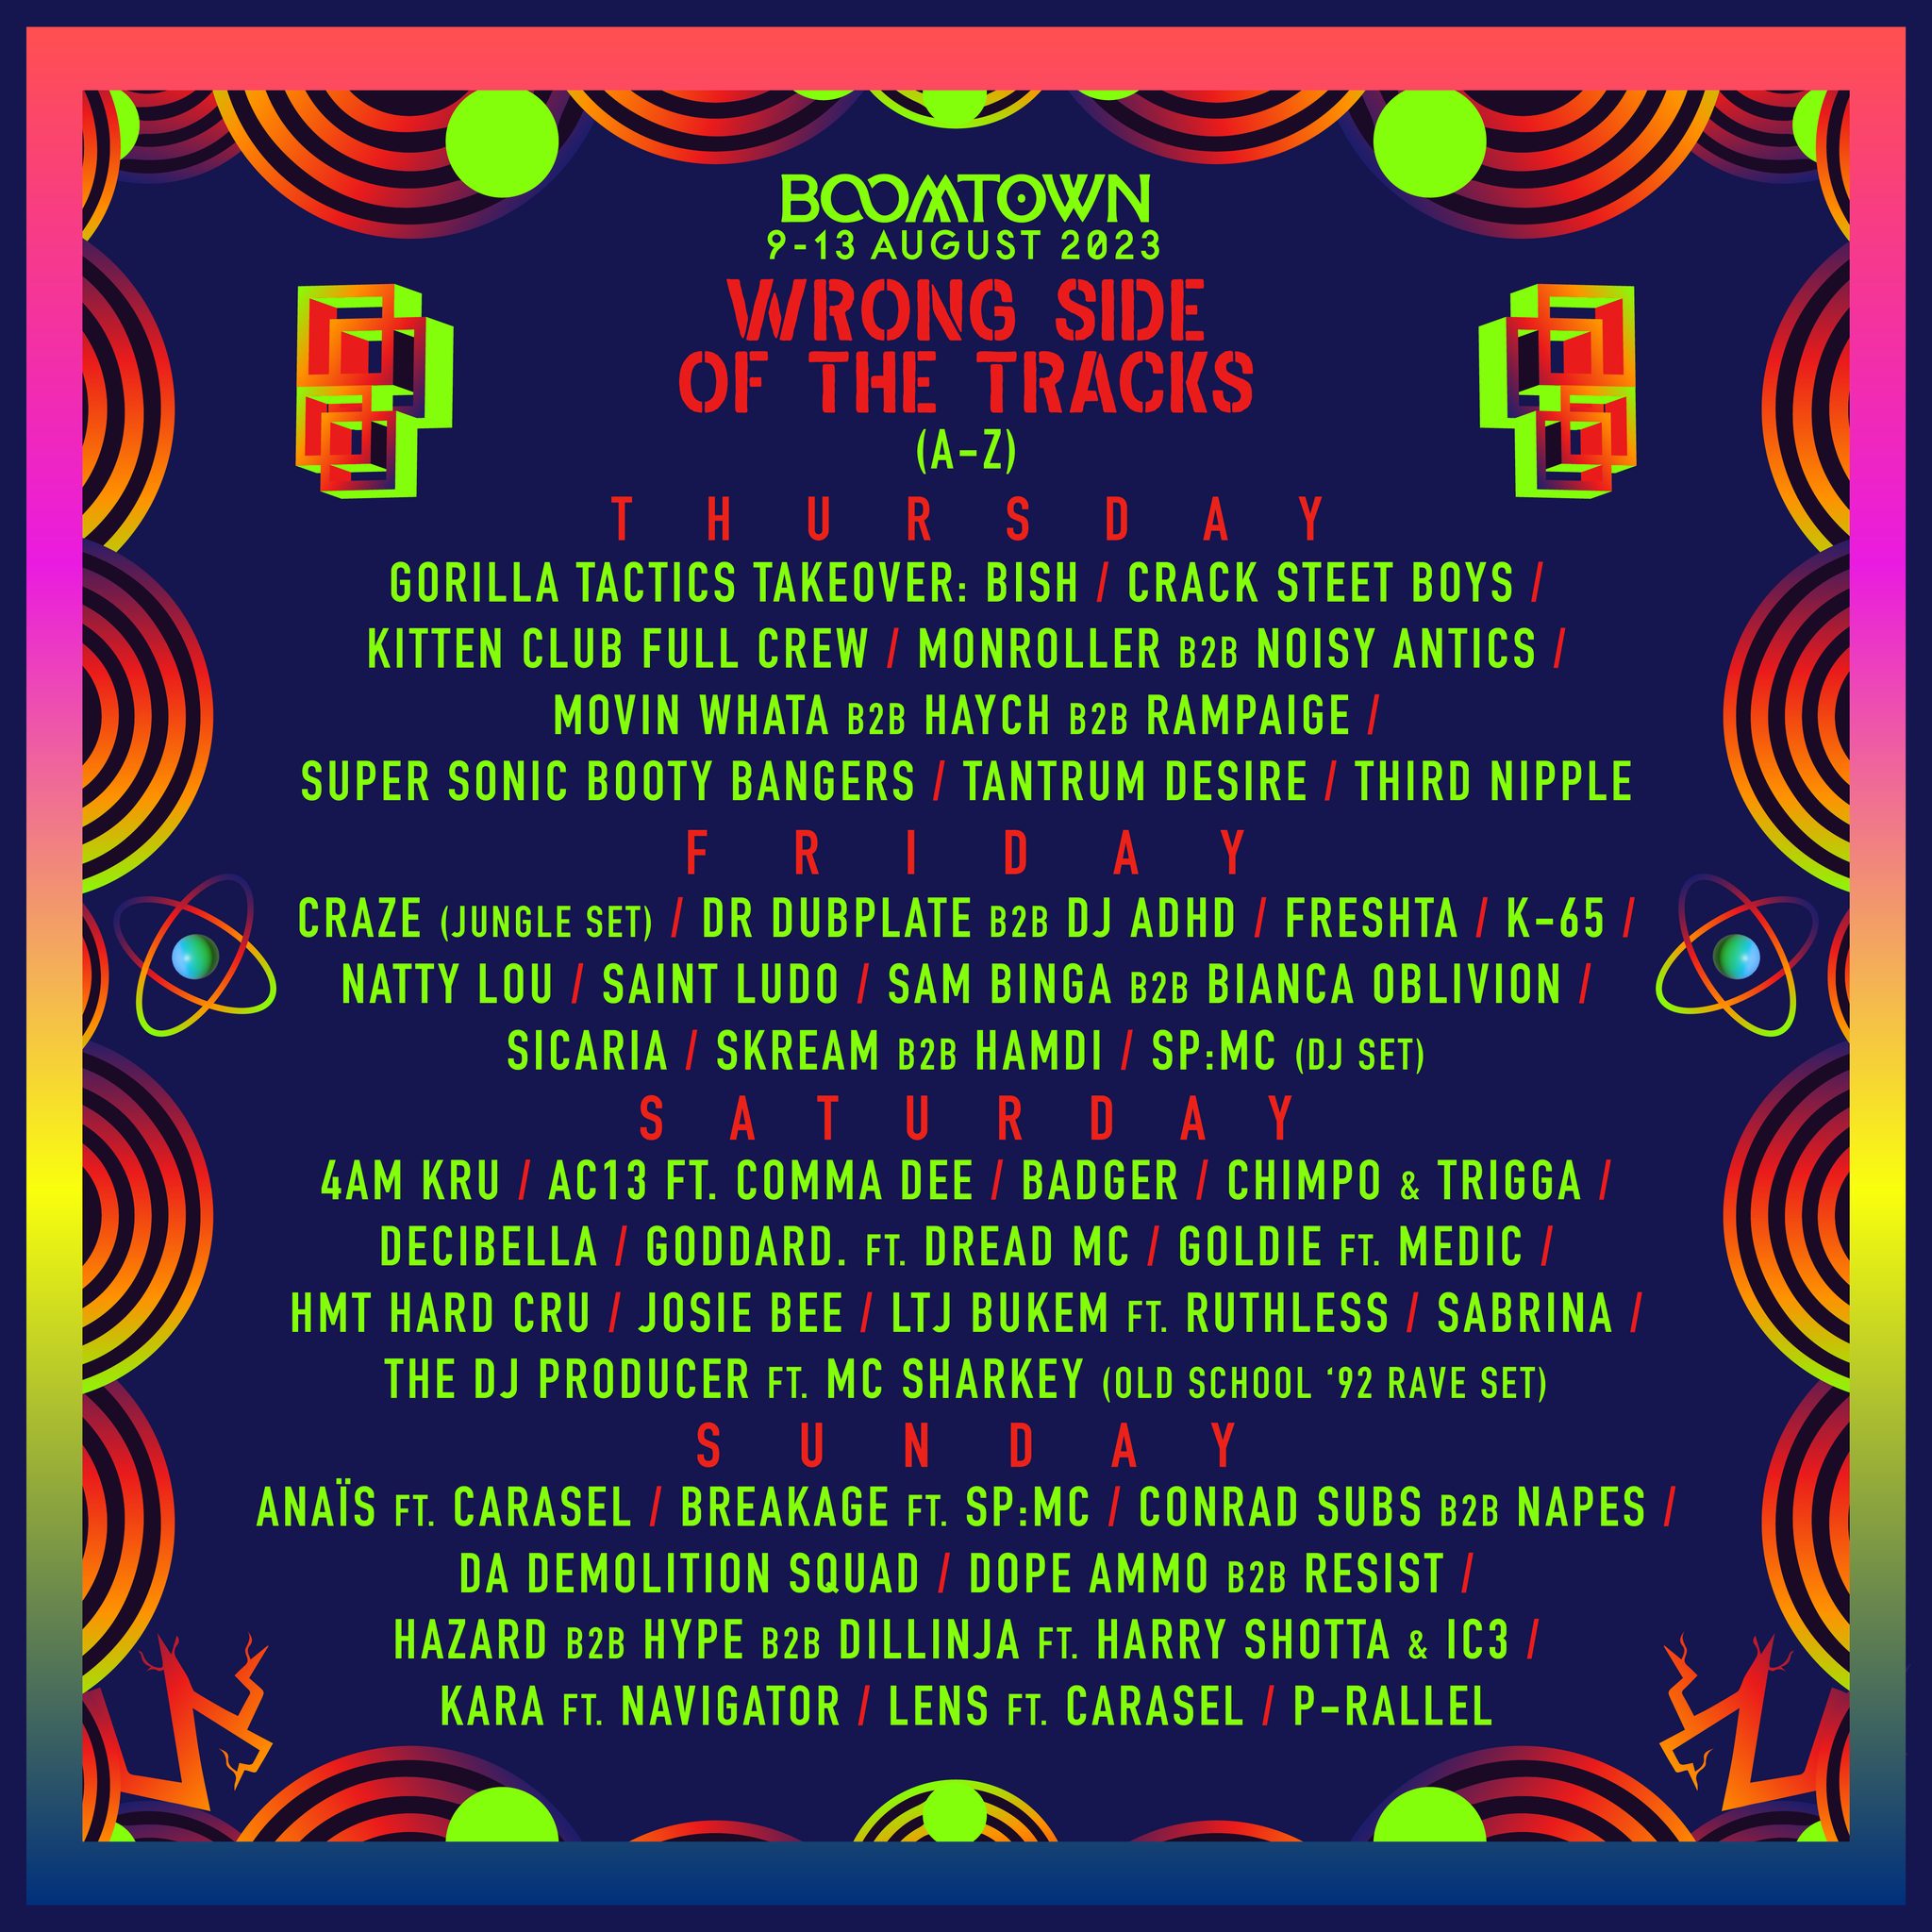 Boomtown Wrong Side Of The Tracks Lineup 2023